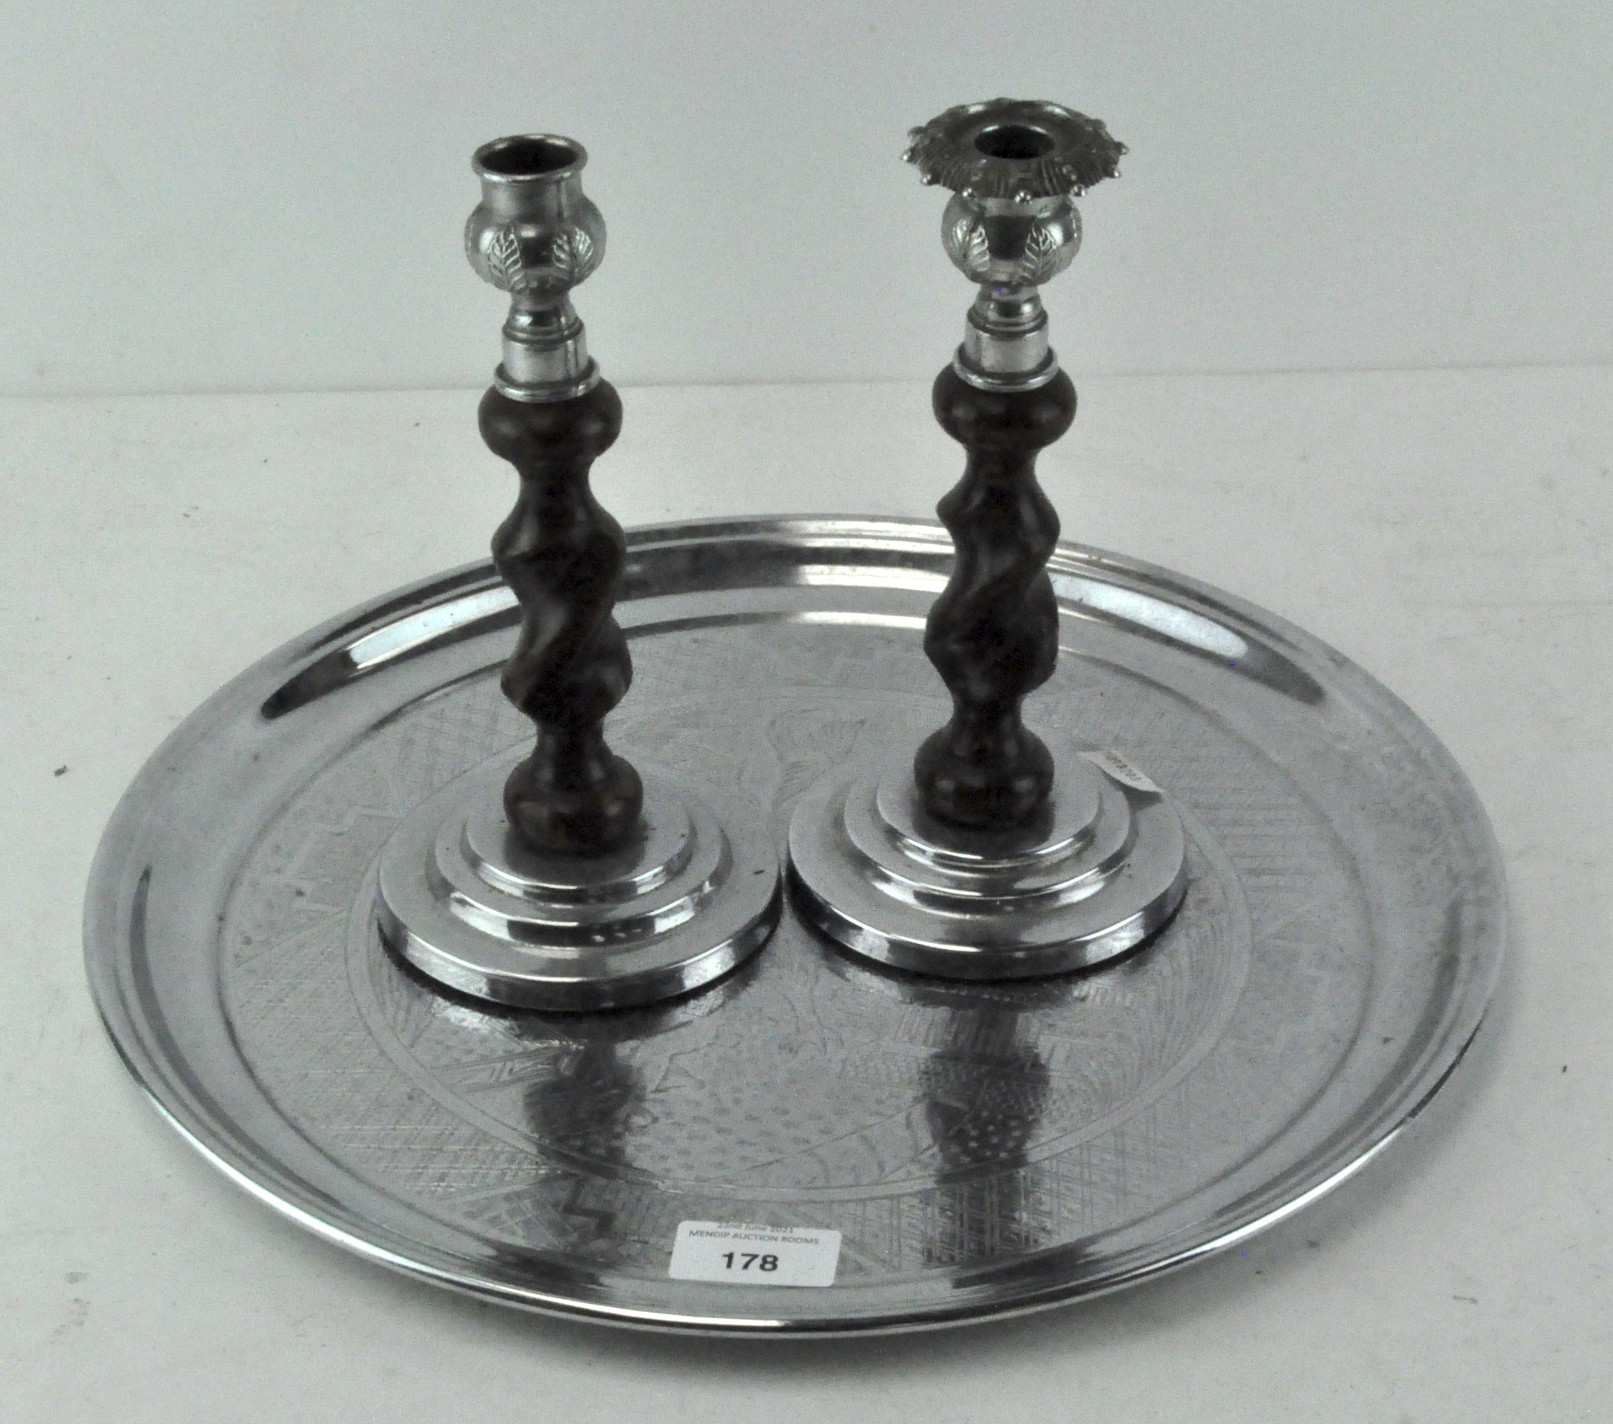 Two candle sticks togther with a tray